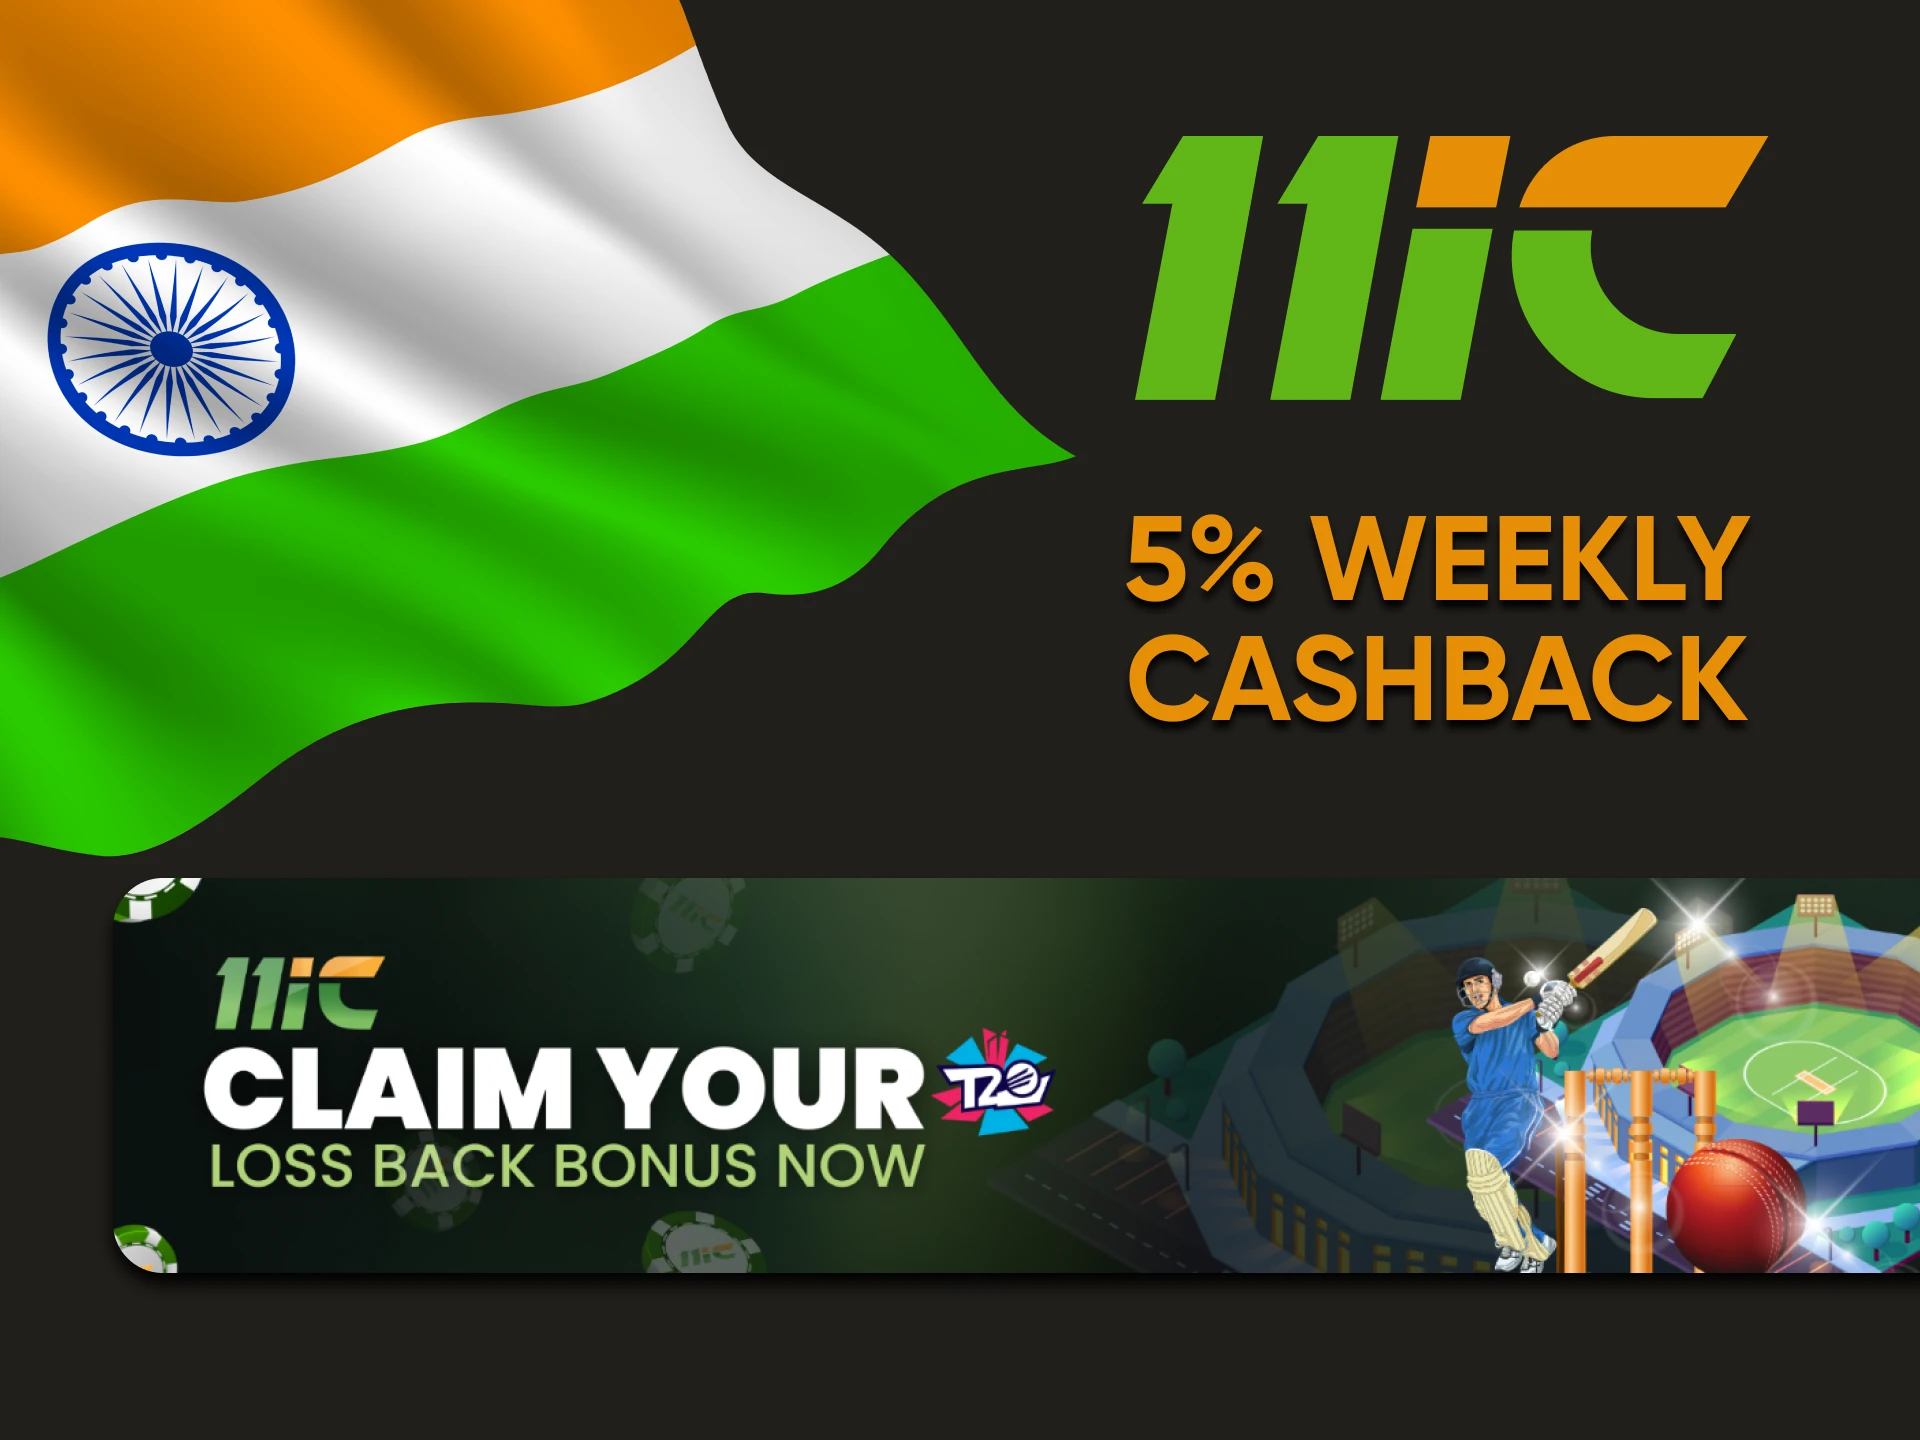 11ic is giving 5% cashback on cricket bets.